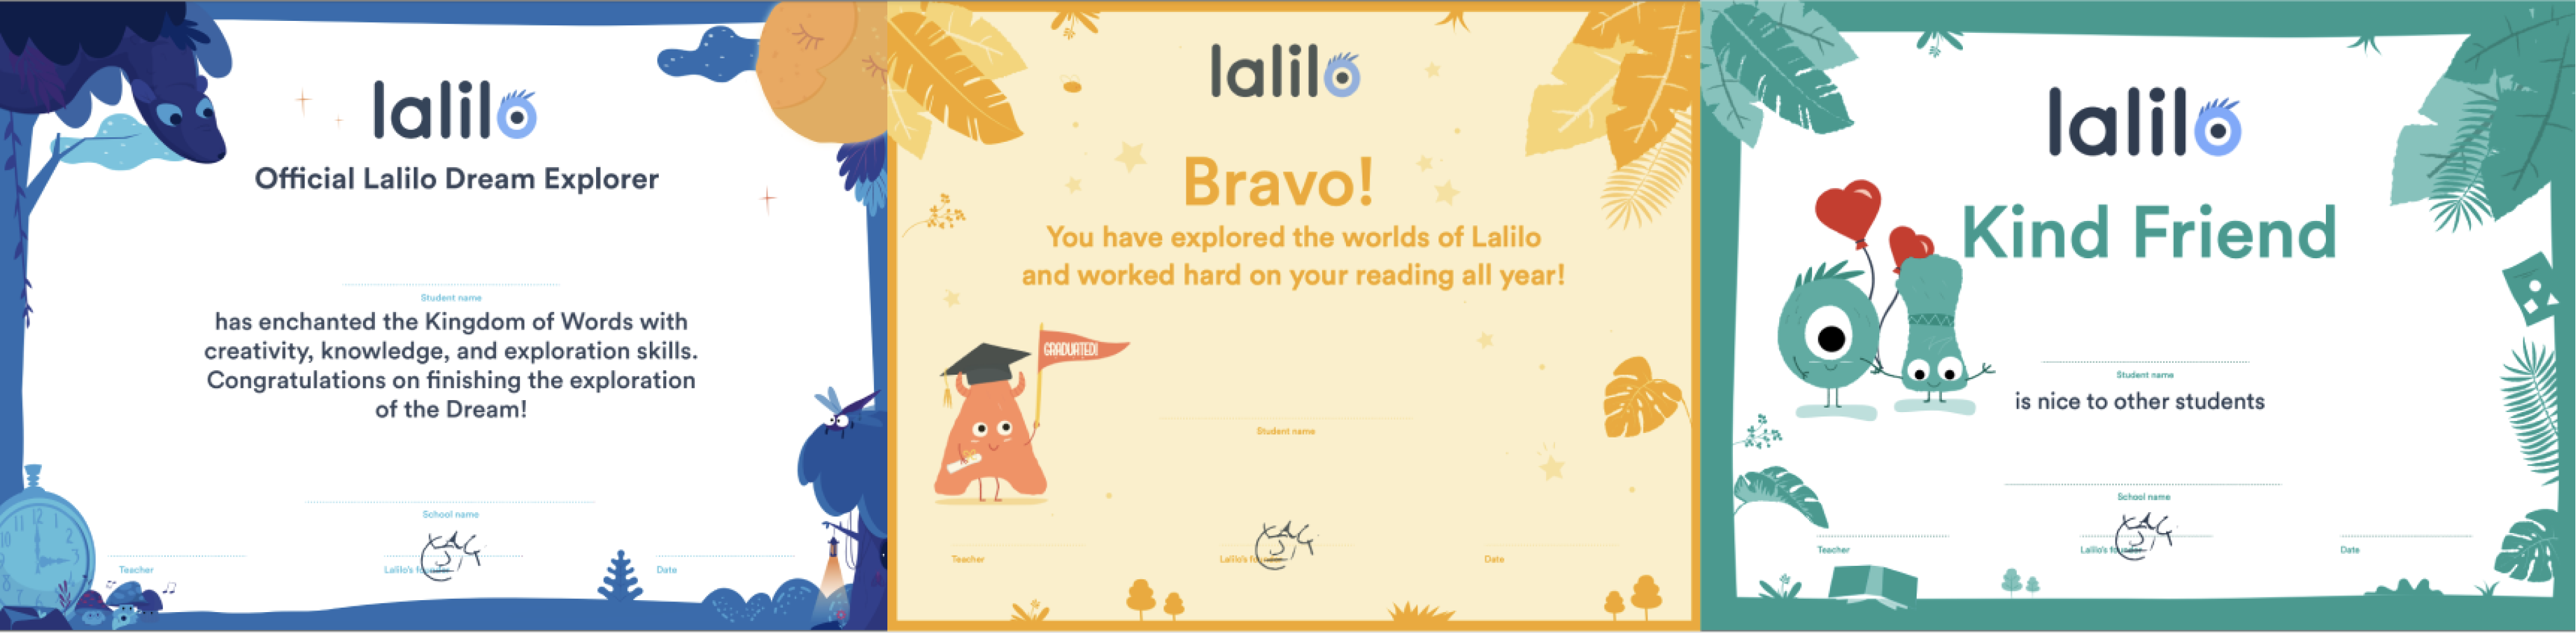 Three example diplomas: Official Lalilo Dream Explorer, Bravo!, and Kind Friend.